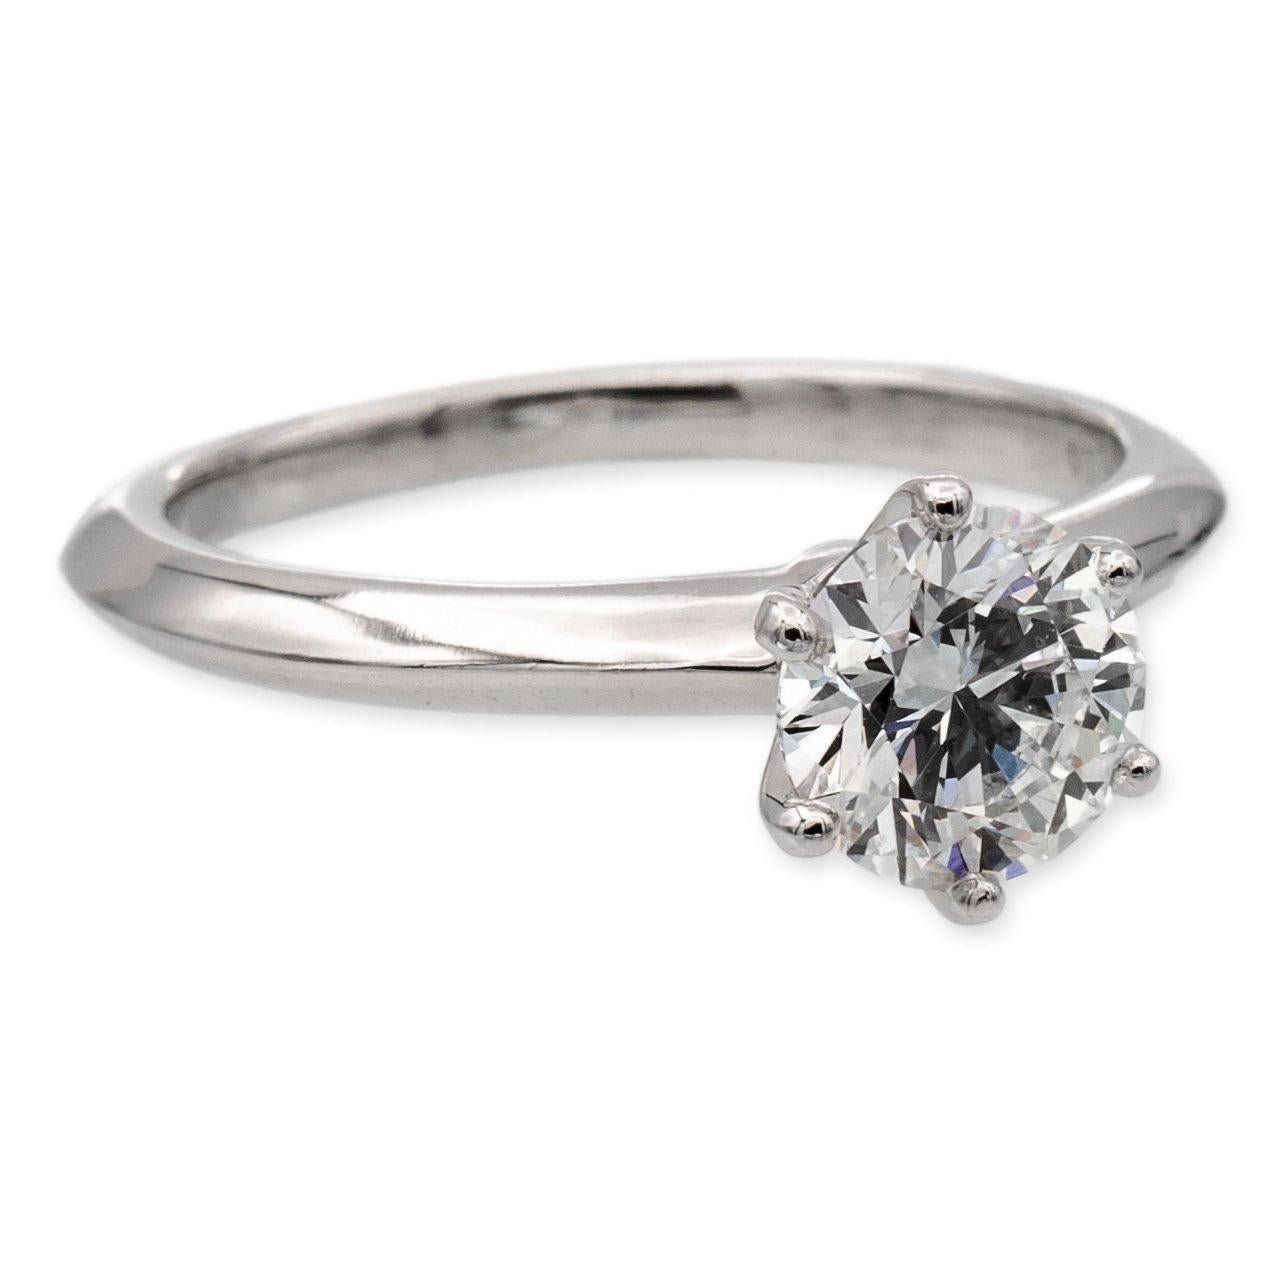 Tiffany & Co. Solitaire diamond engagement ring finely crafted in a six prong platinum mounting featuring a 1.14 carat round brilliant diamond center graded G color and VS2 Clarity. The diamond is inscribed with Tiffanys serial numbers and has